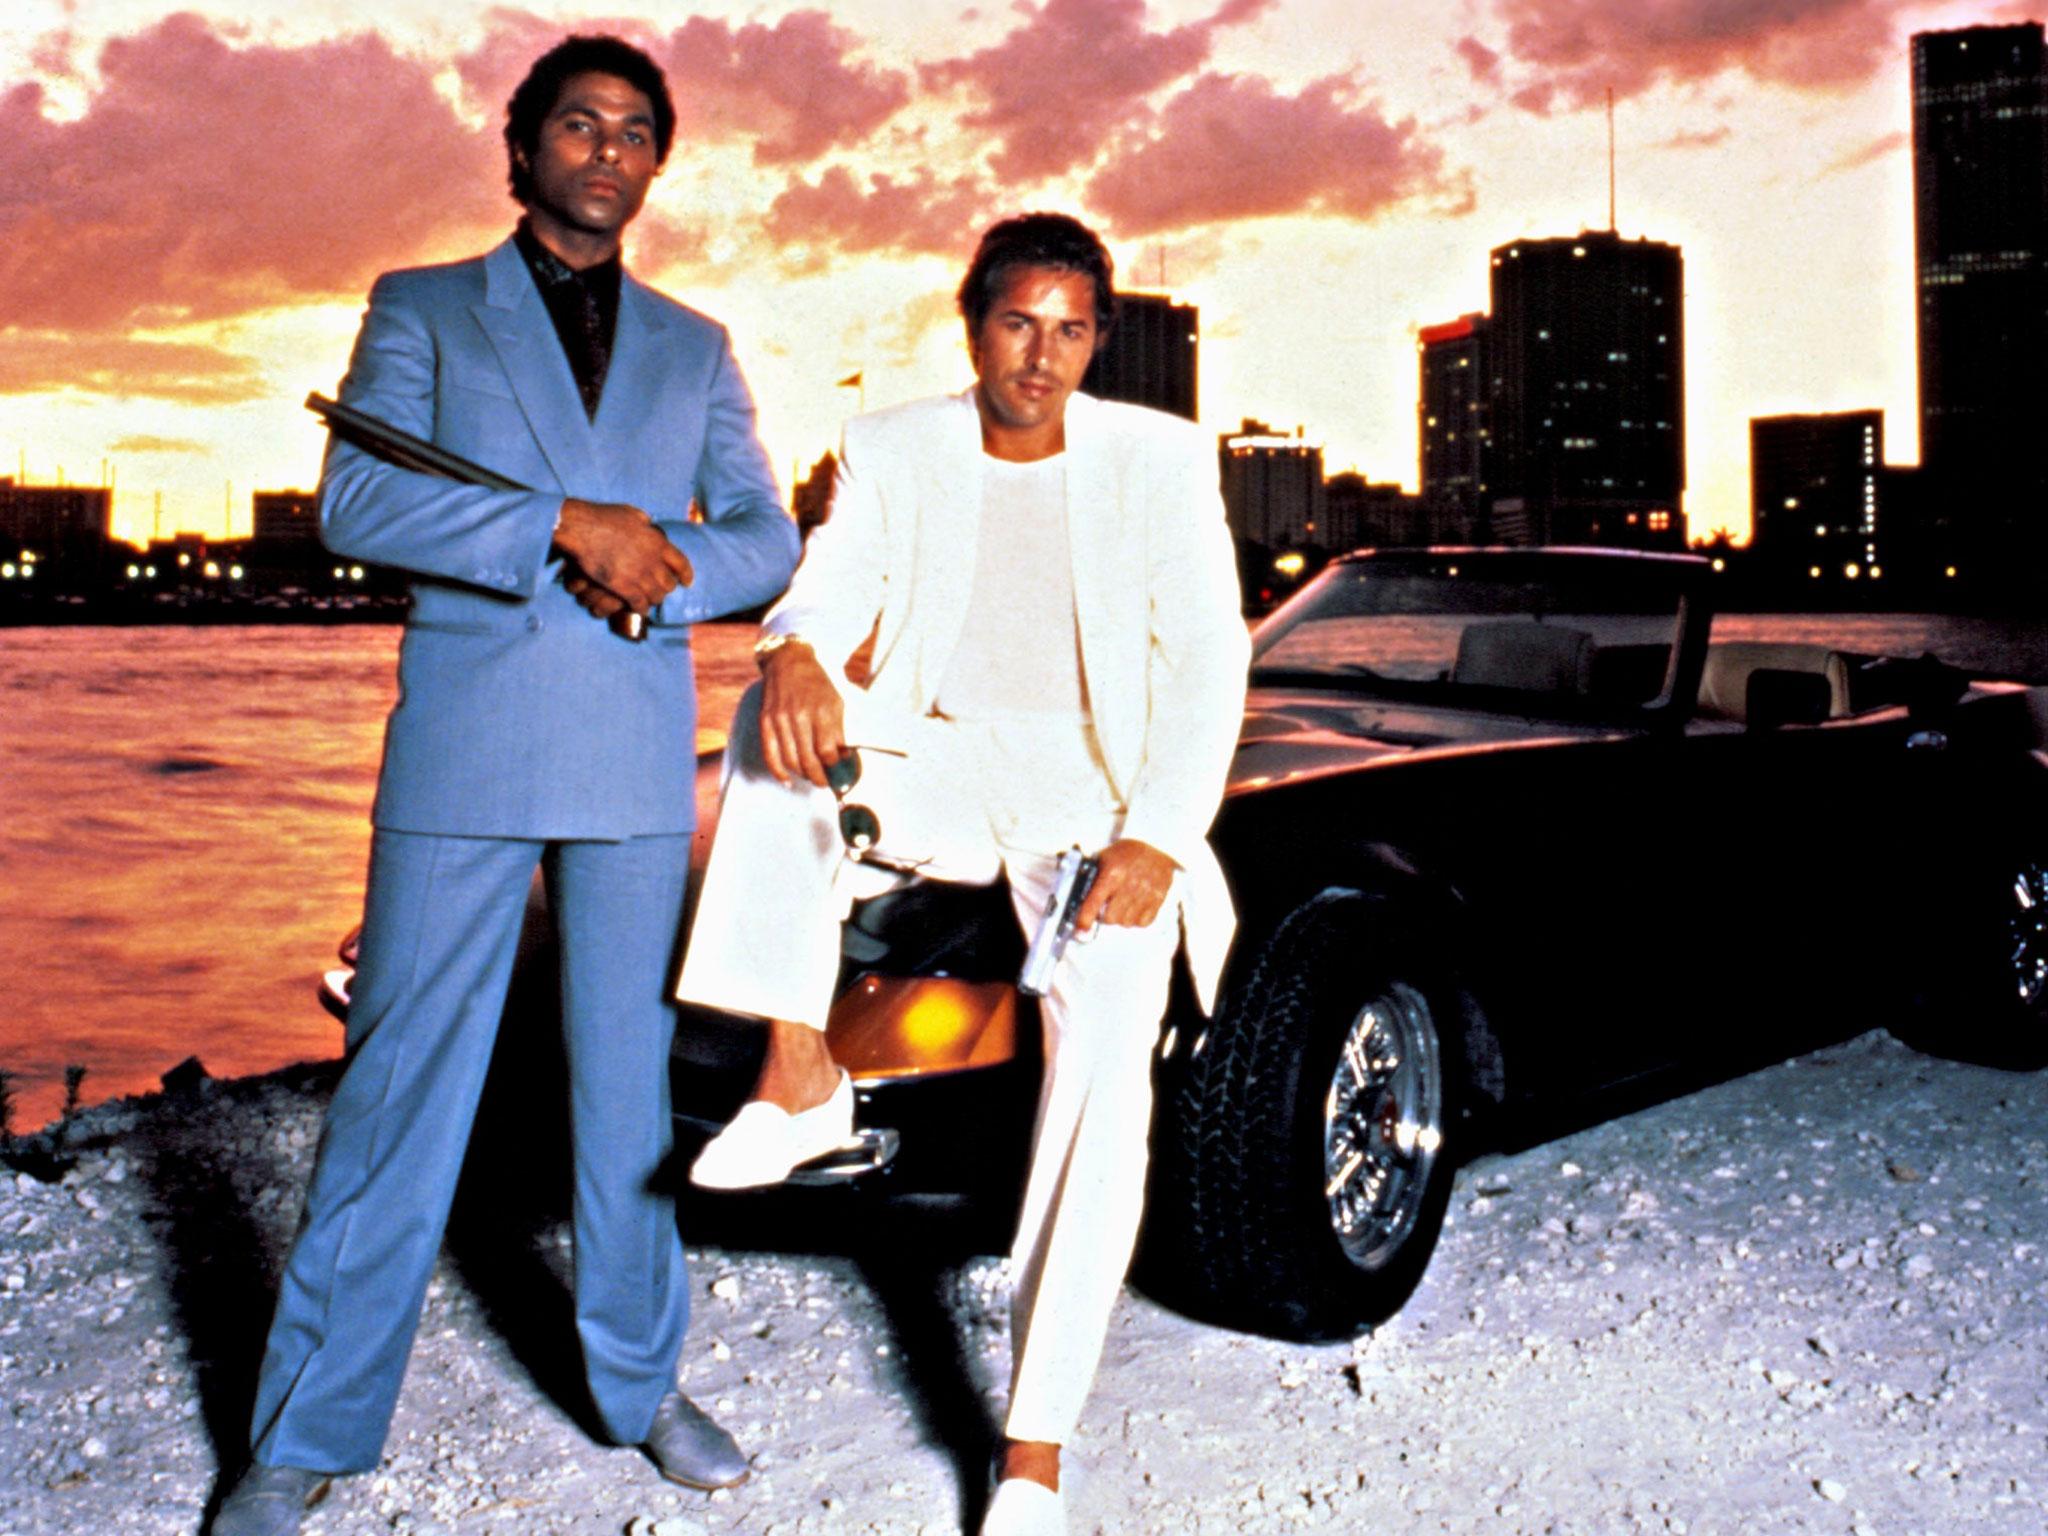 Don Johnson and Philip Michael Thomas in ‘Miami Vice’. Mossack Fonseca featured in an episode of the television series